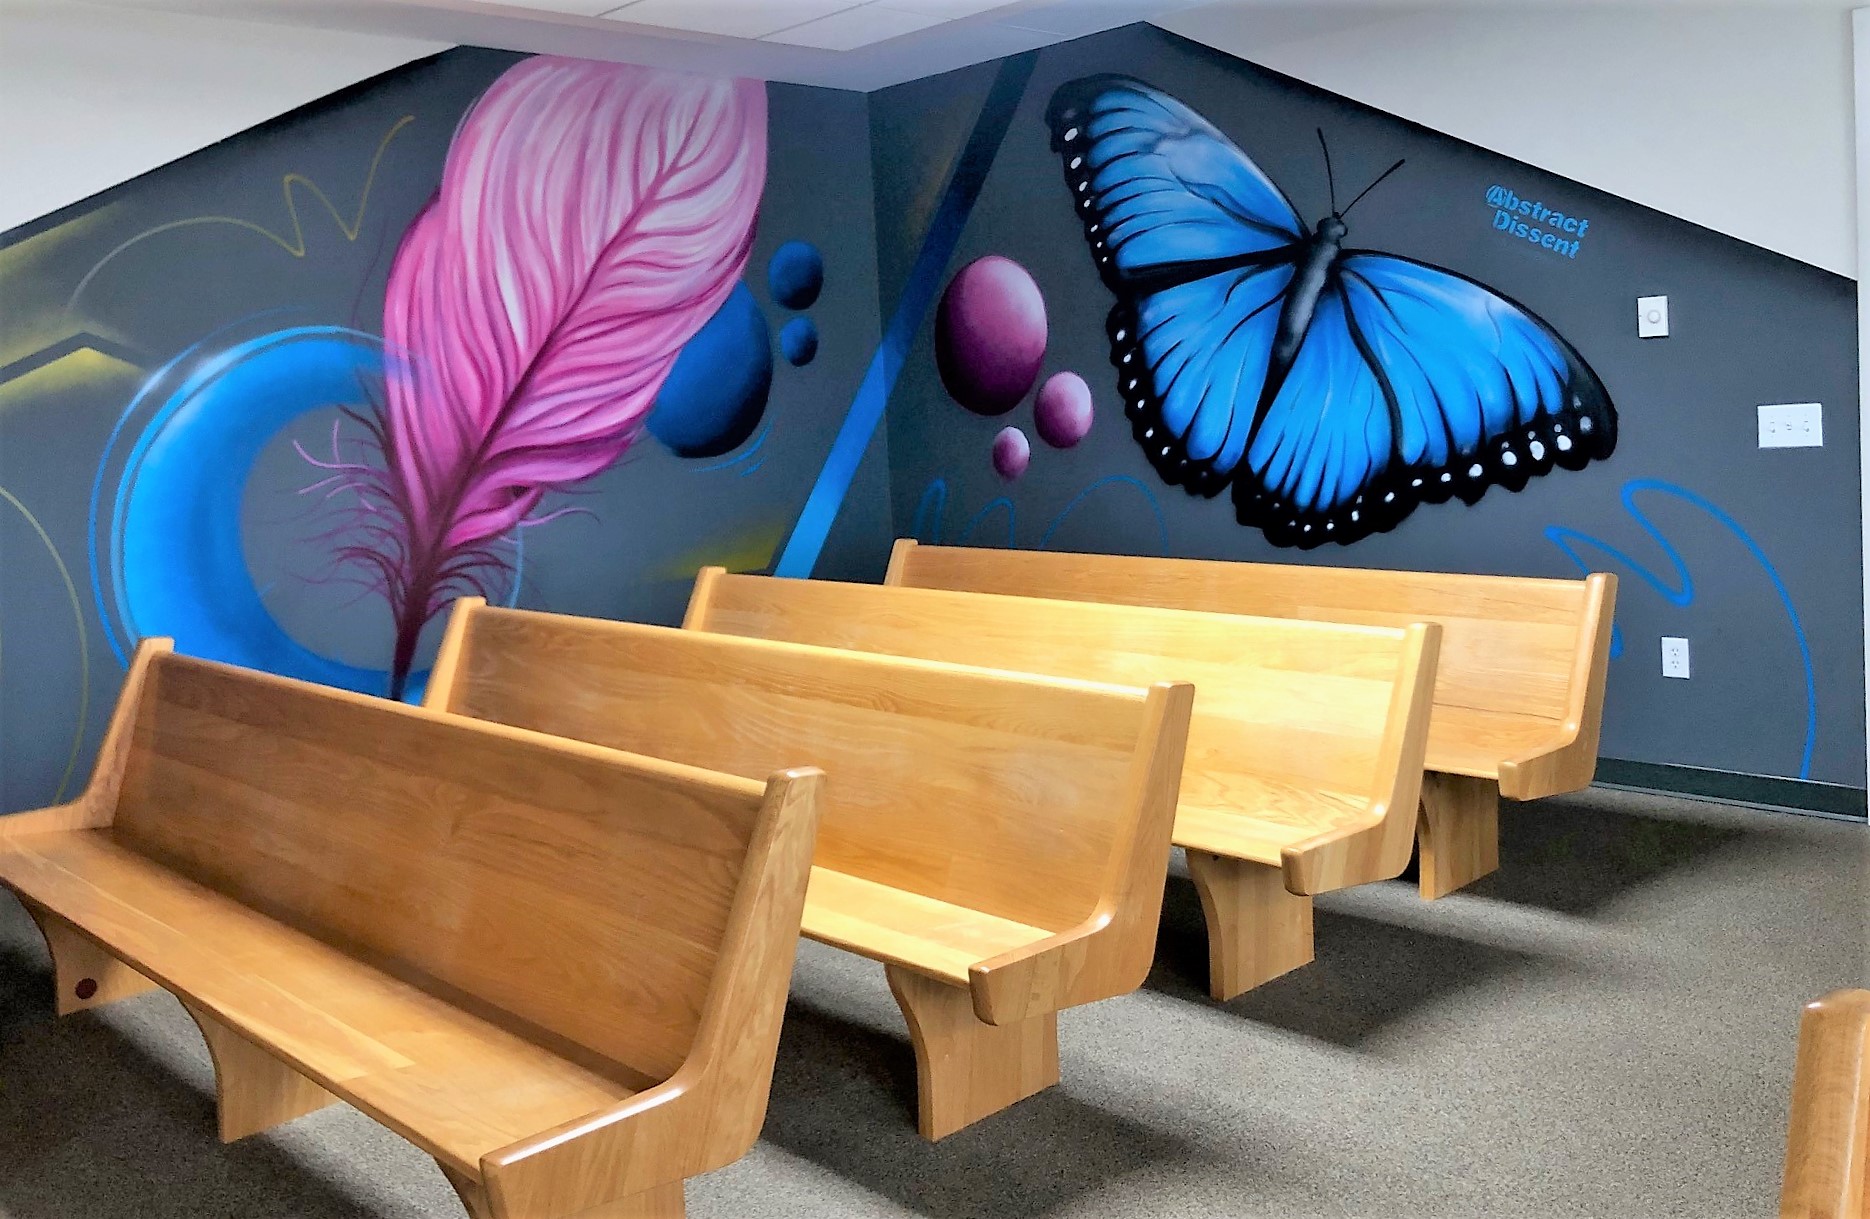 Images in the mural are calming, soothing, and represent renewal and strength. 